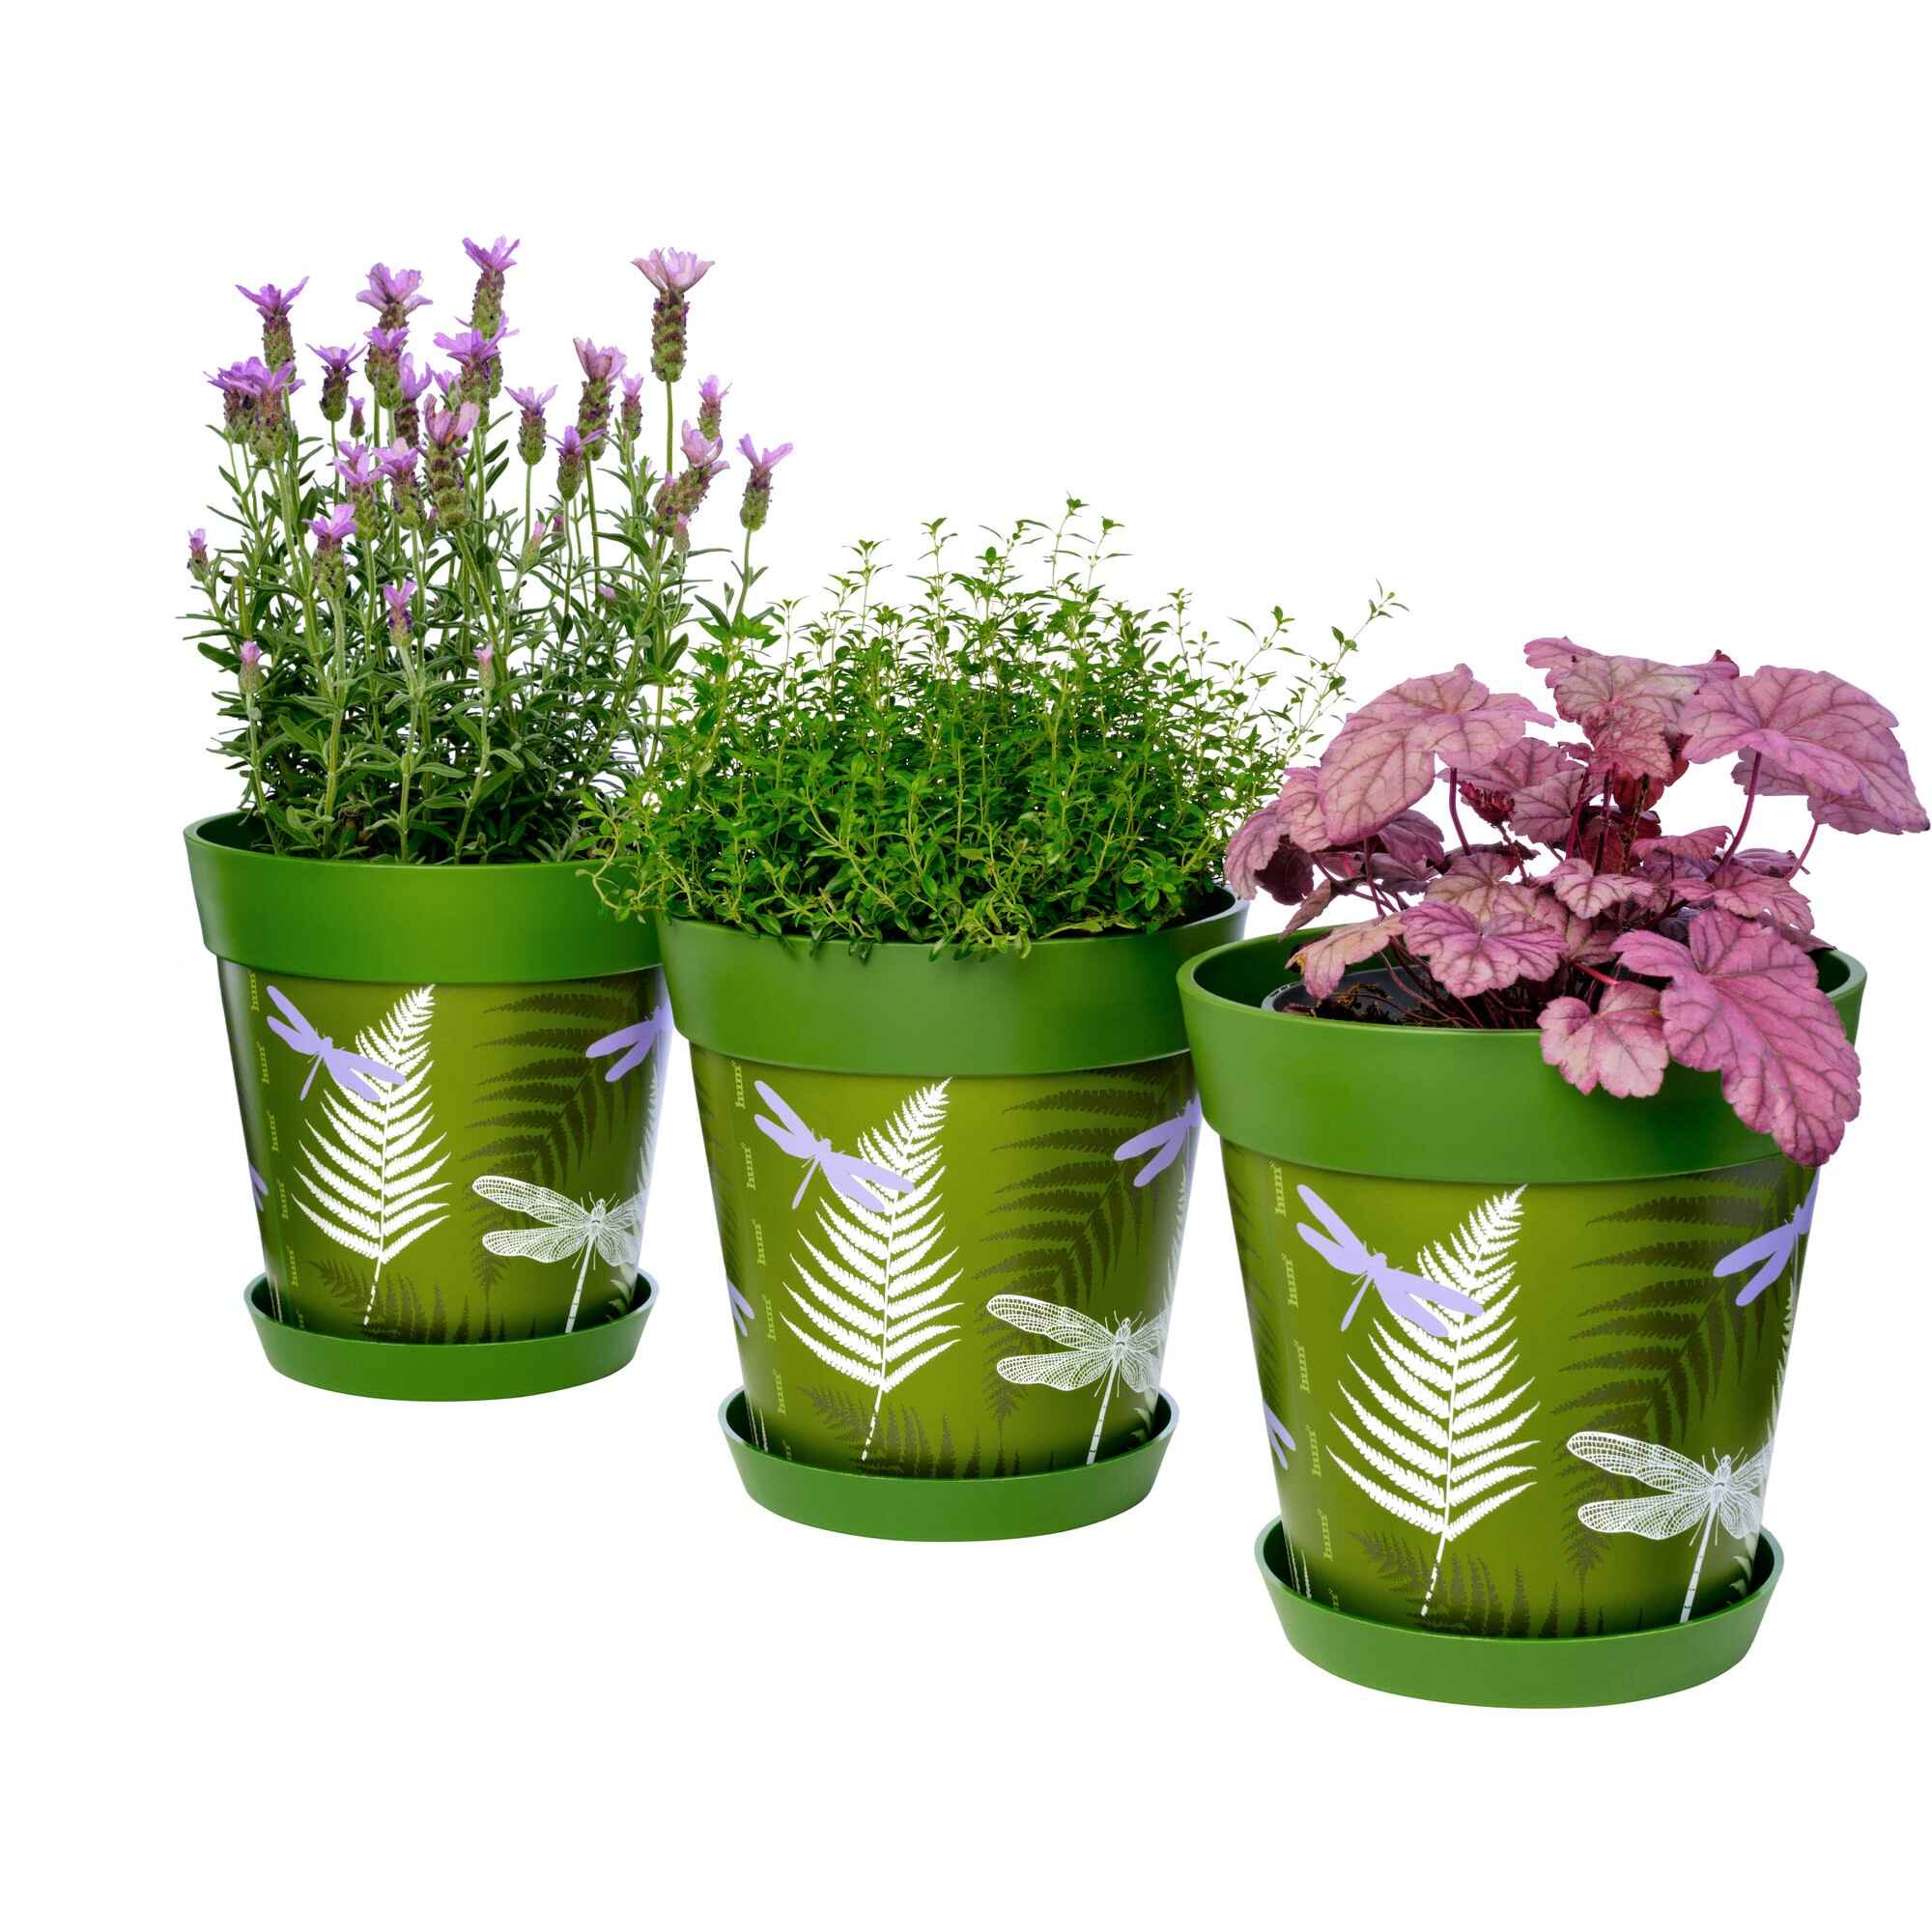 Picture of 3 Planted Medium 22cm Green Dragonflies Pattern Indoor/Outdoor Flower Pot and Saucers 